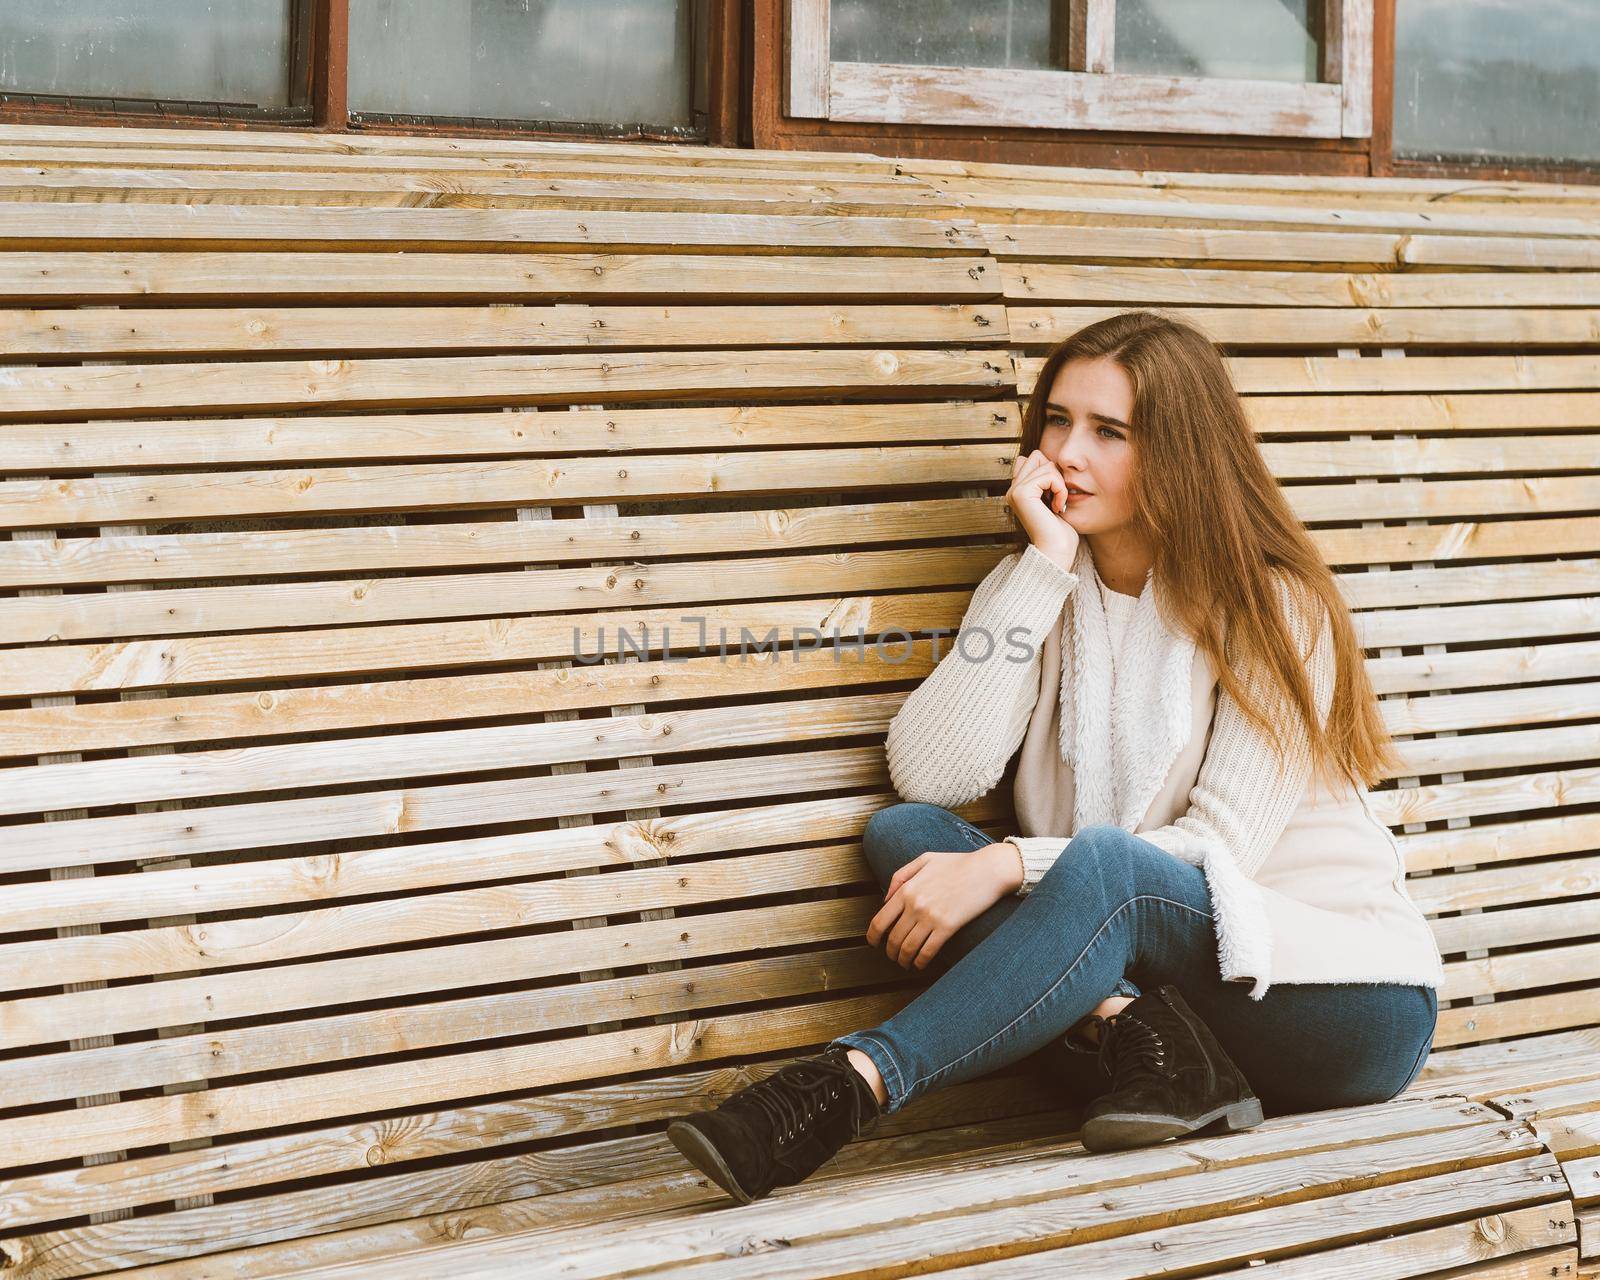 Beautiful young girl with long brown hair sits on a wooden bench made of planks and rests, relaxes and reflects. Outdoor photo shoot with attractive woman in winter or autumn